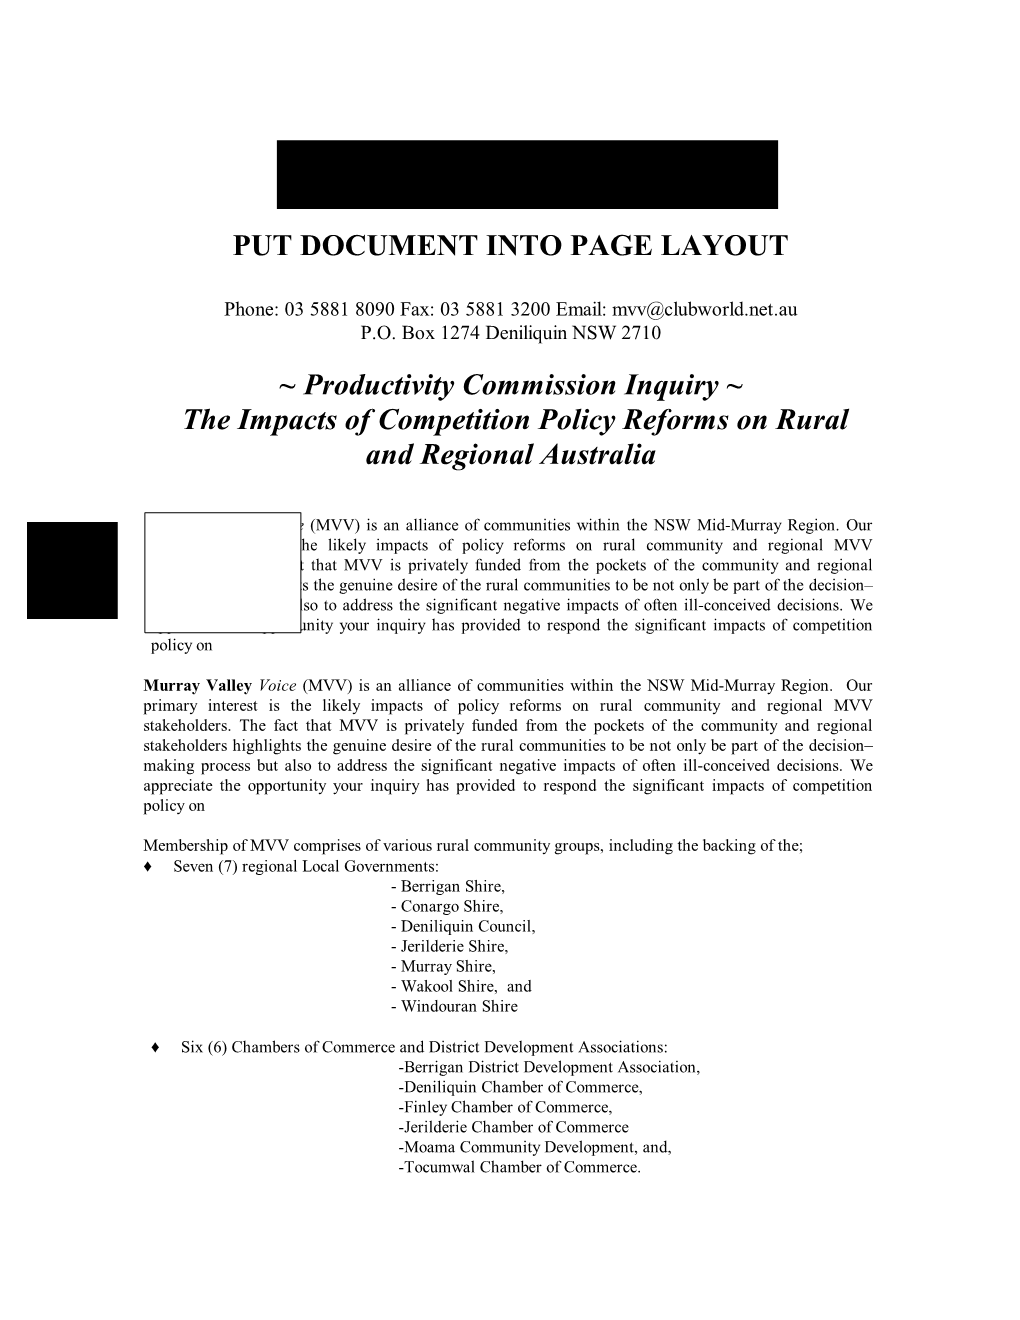 Productivity Commission Inquiry ~ the Impacts of Competition Policy Reforms on Rural and Regional Australia